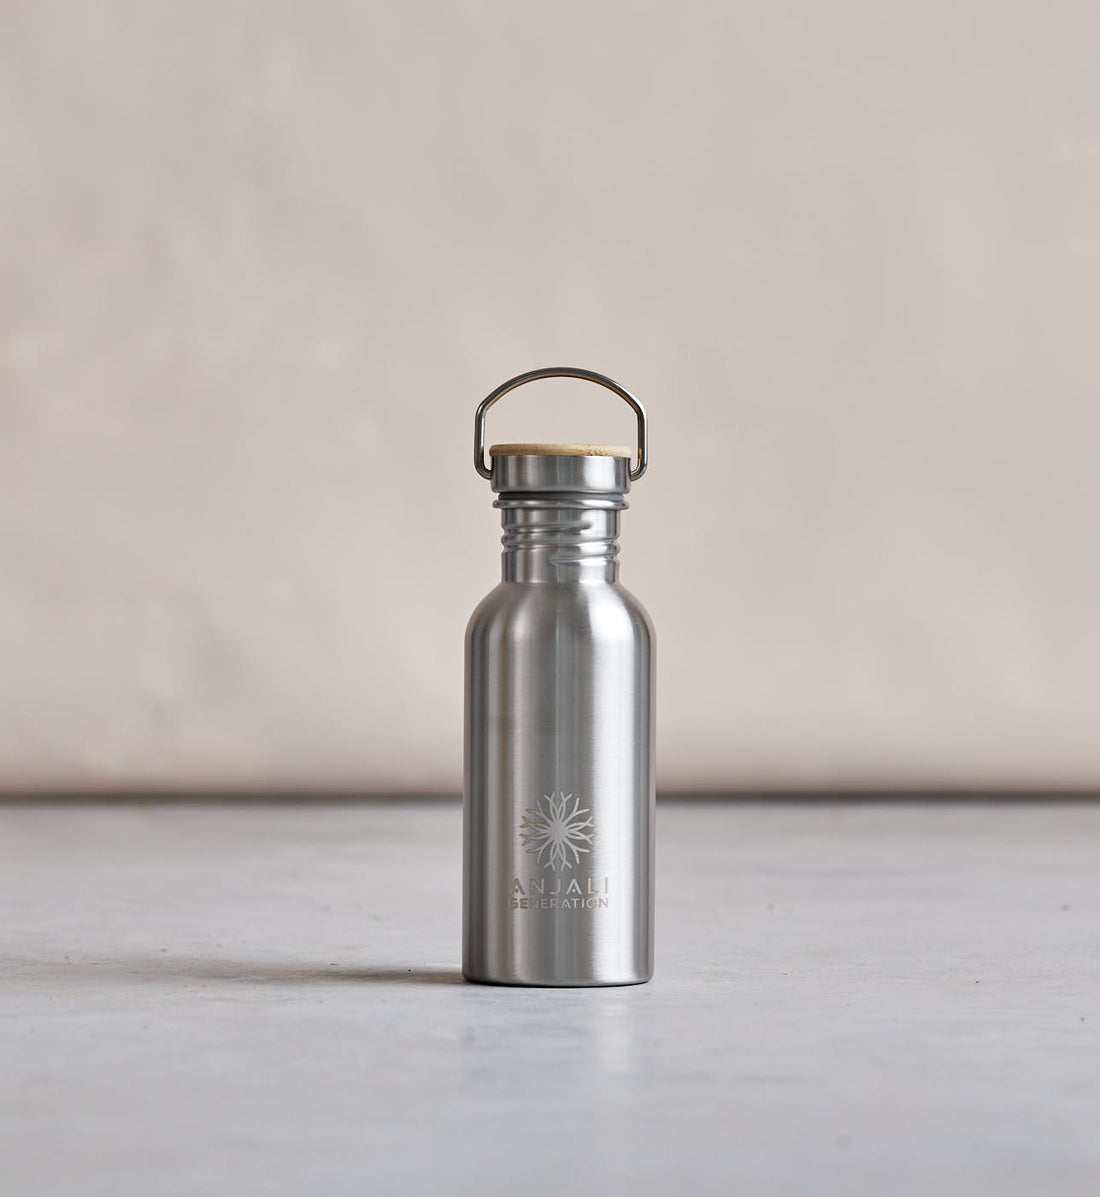 The Benefits of Using a Stainless Steel Water Bottle Over a Plastic One